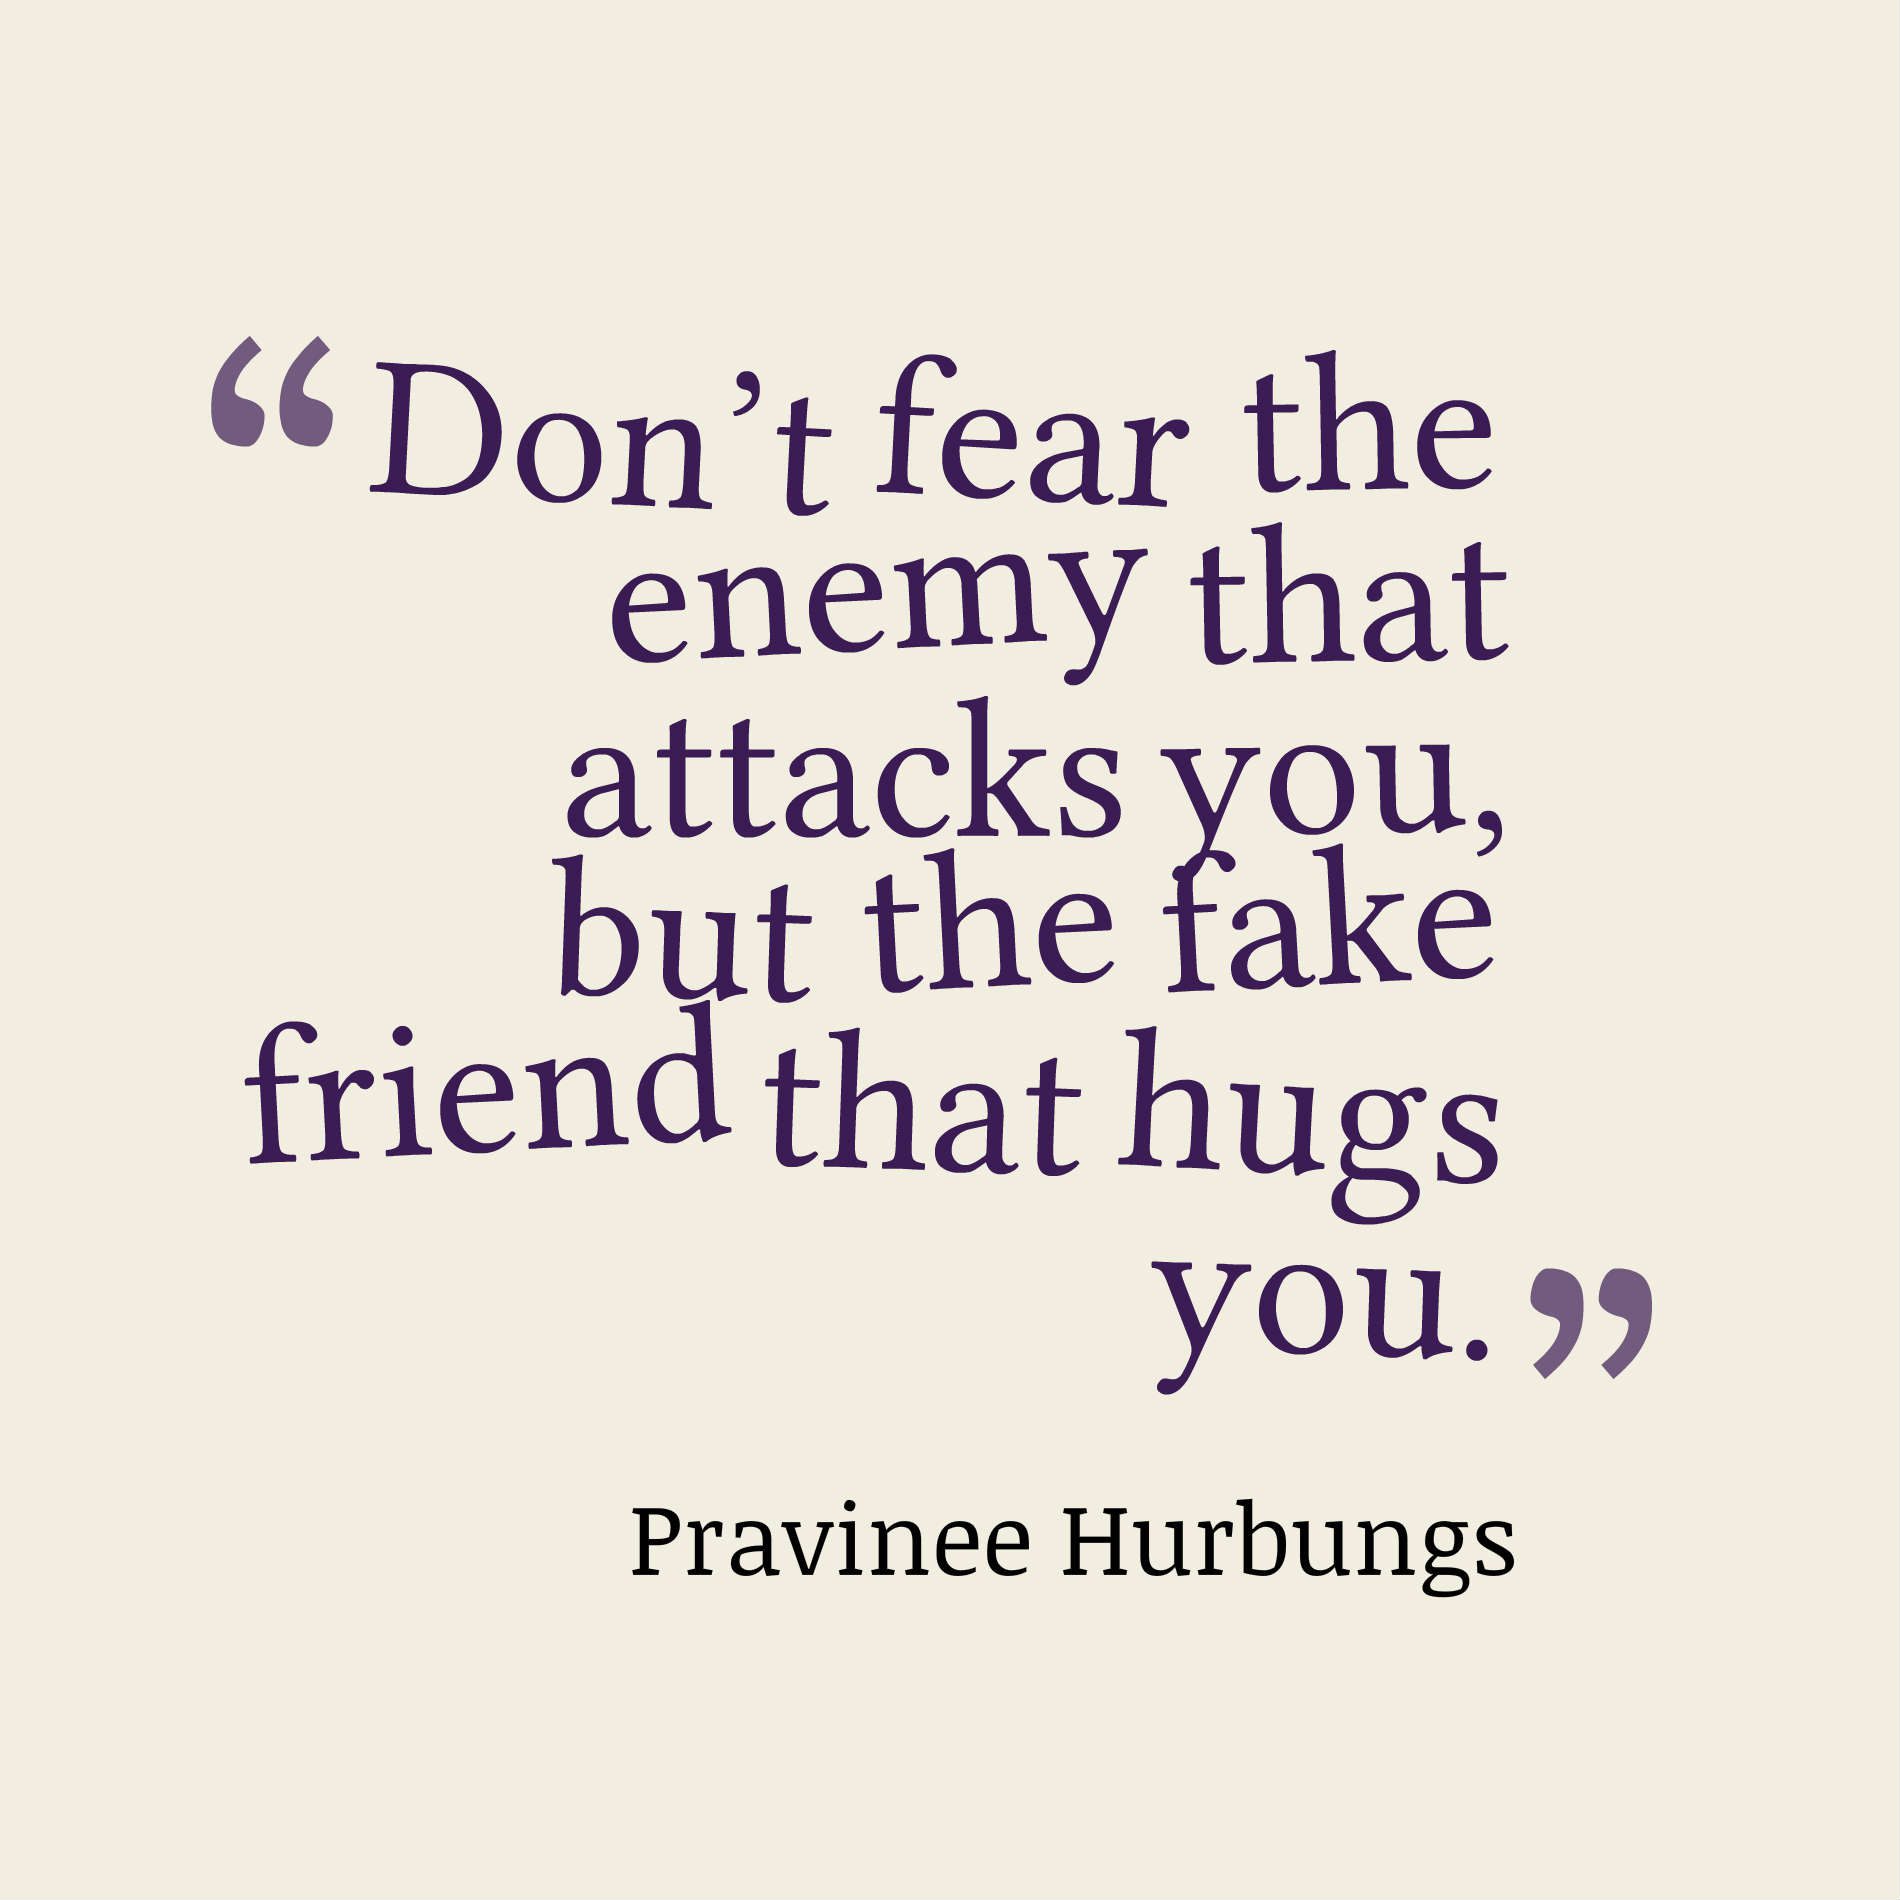 Don’t fear the enemy that attacks you, but the fake friend that hugs you.